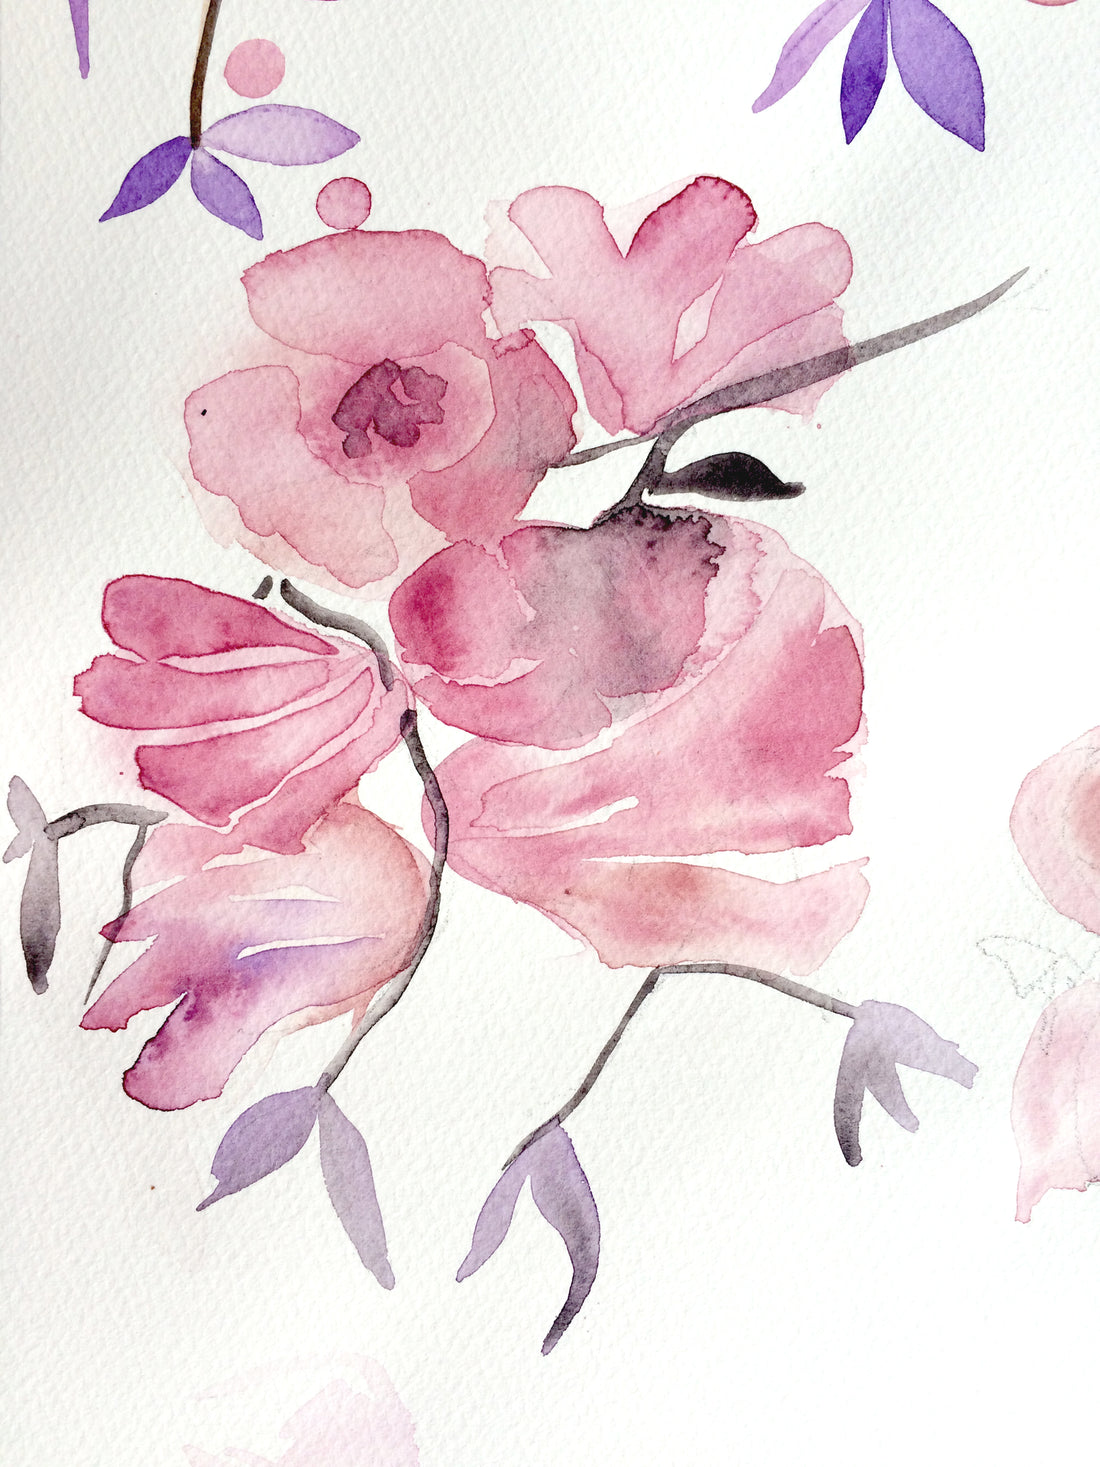 Watercolor painting stylized flowers